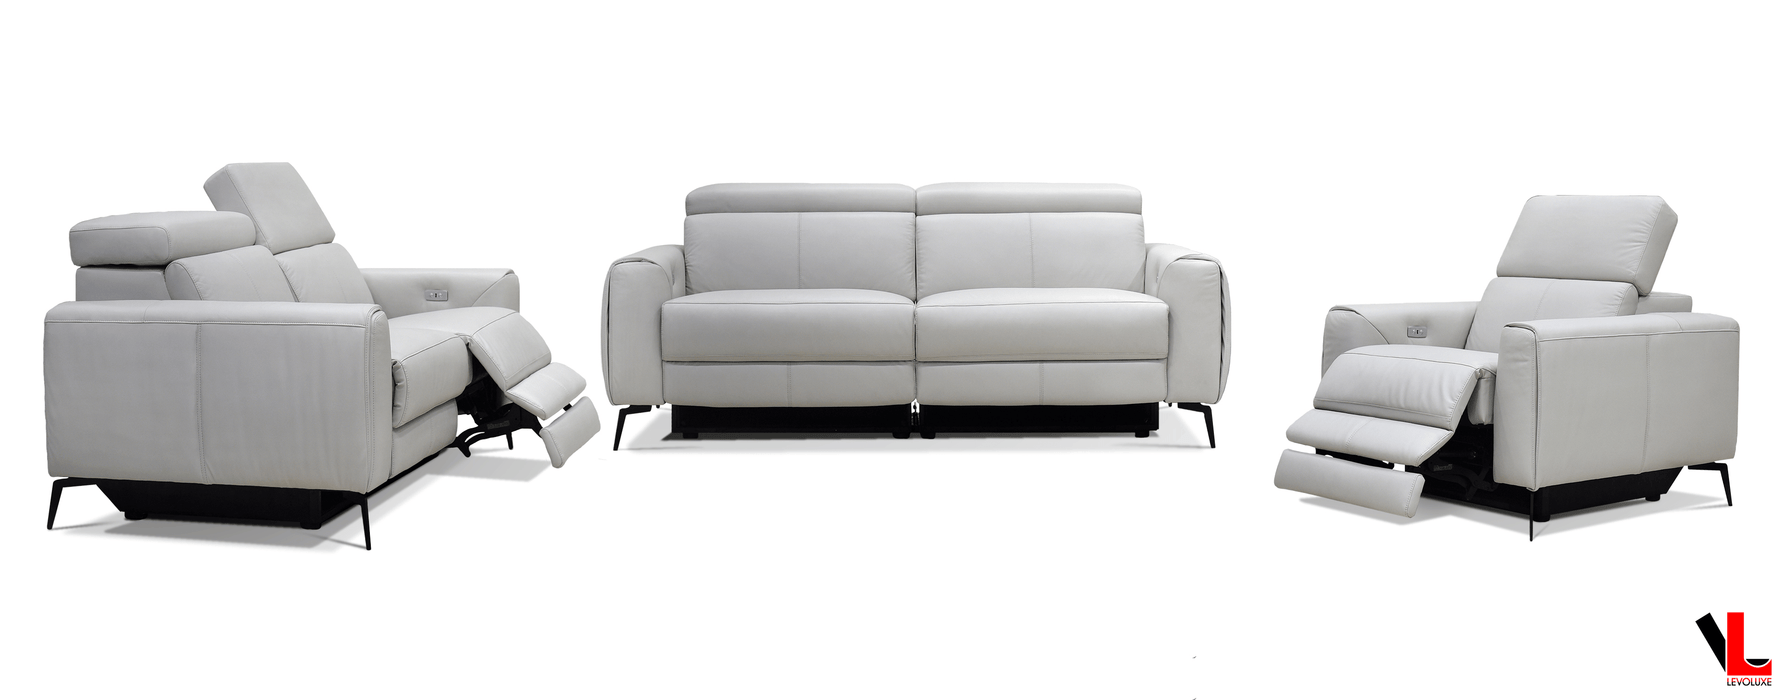 Levoluxe Sofa Set Lennox 3 Piece Power Reclining Sofa, Loveseat, and Chair Set with Adjustable Headrests in Light Grey Leather Match